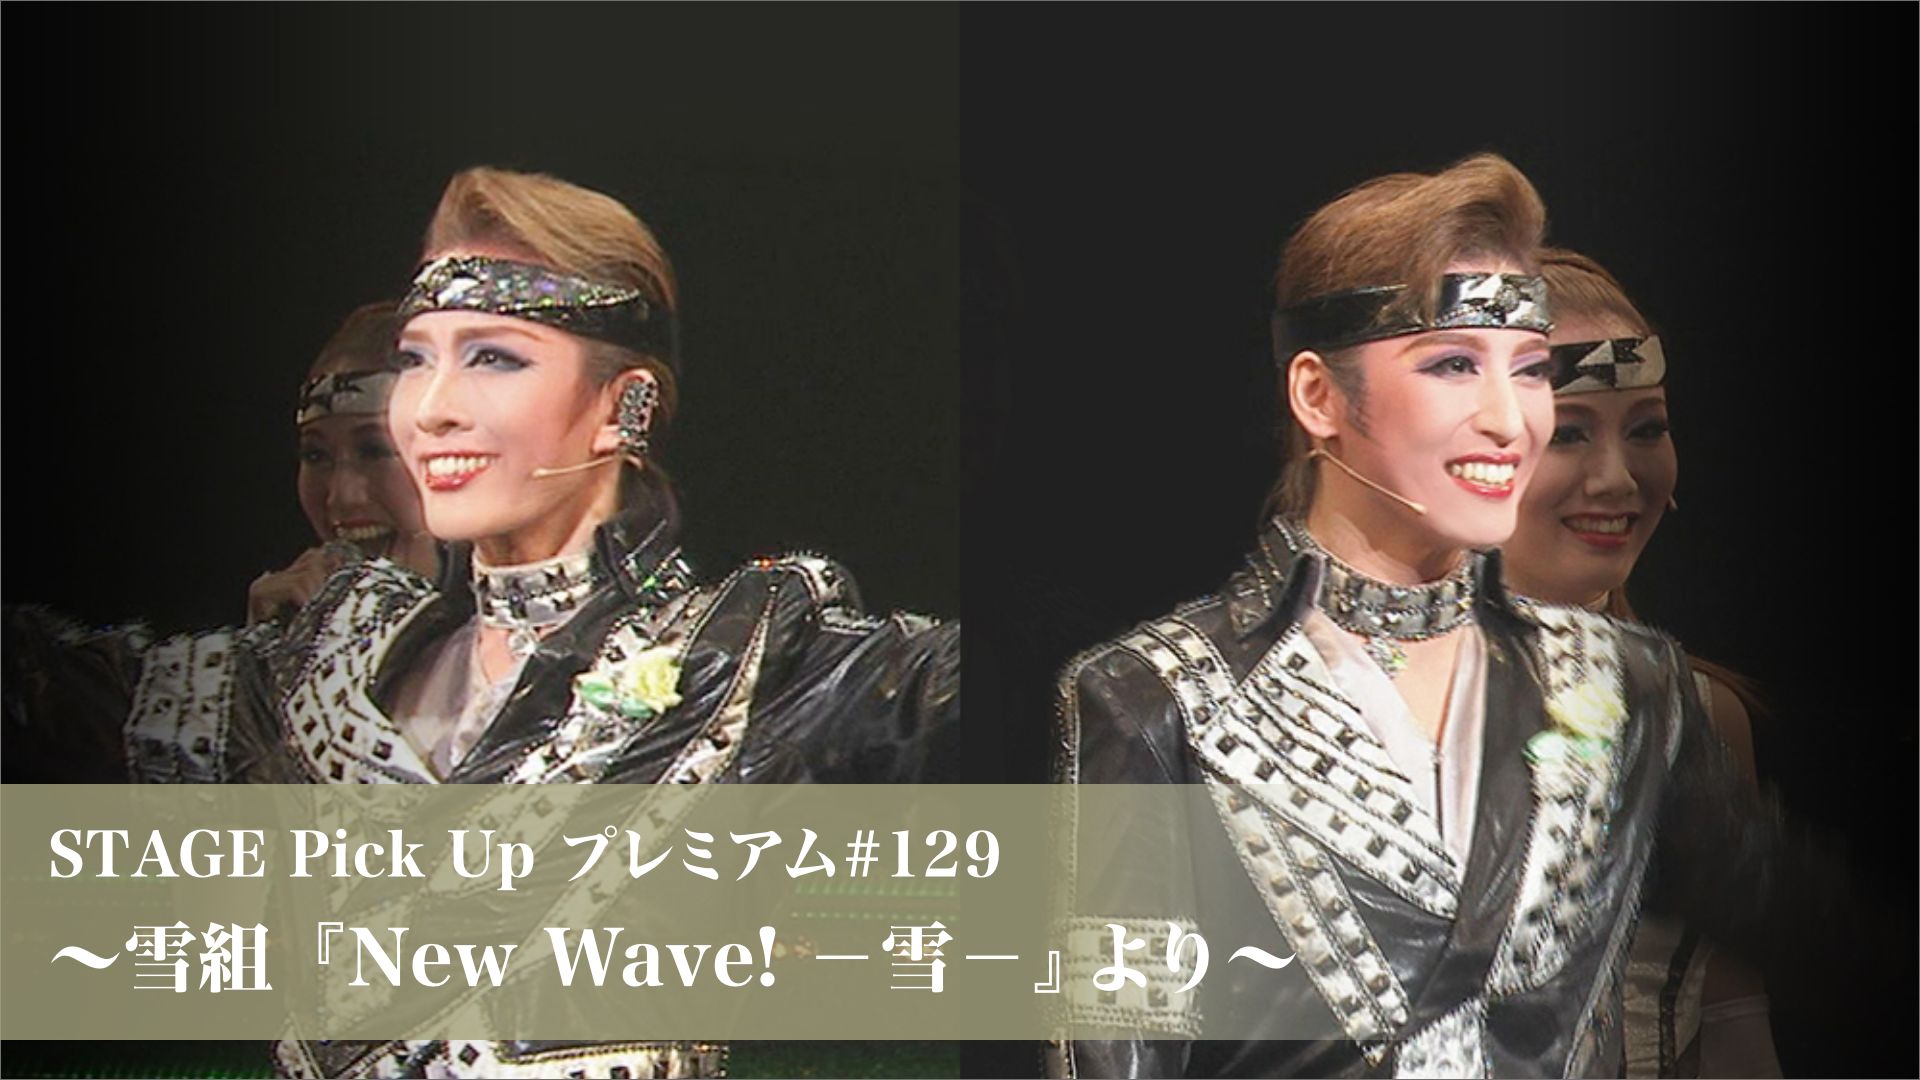 STAGE Pick Up プレミアム#129〜雪組『New Wave! -雪-』より〜